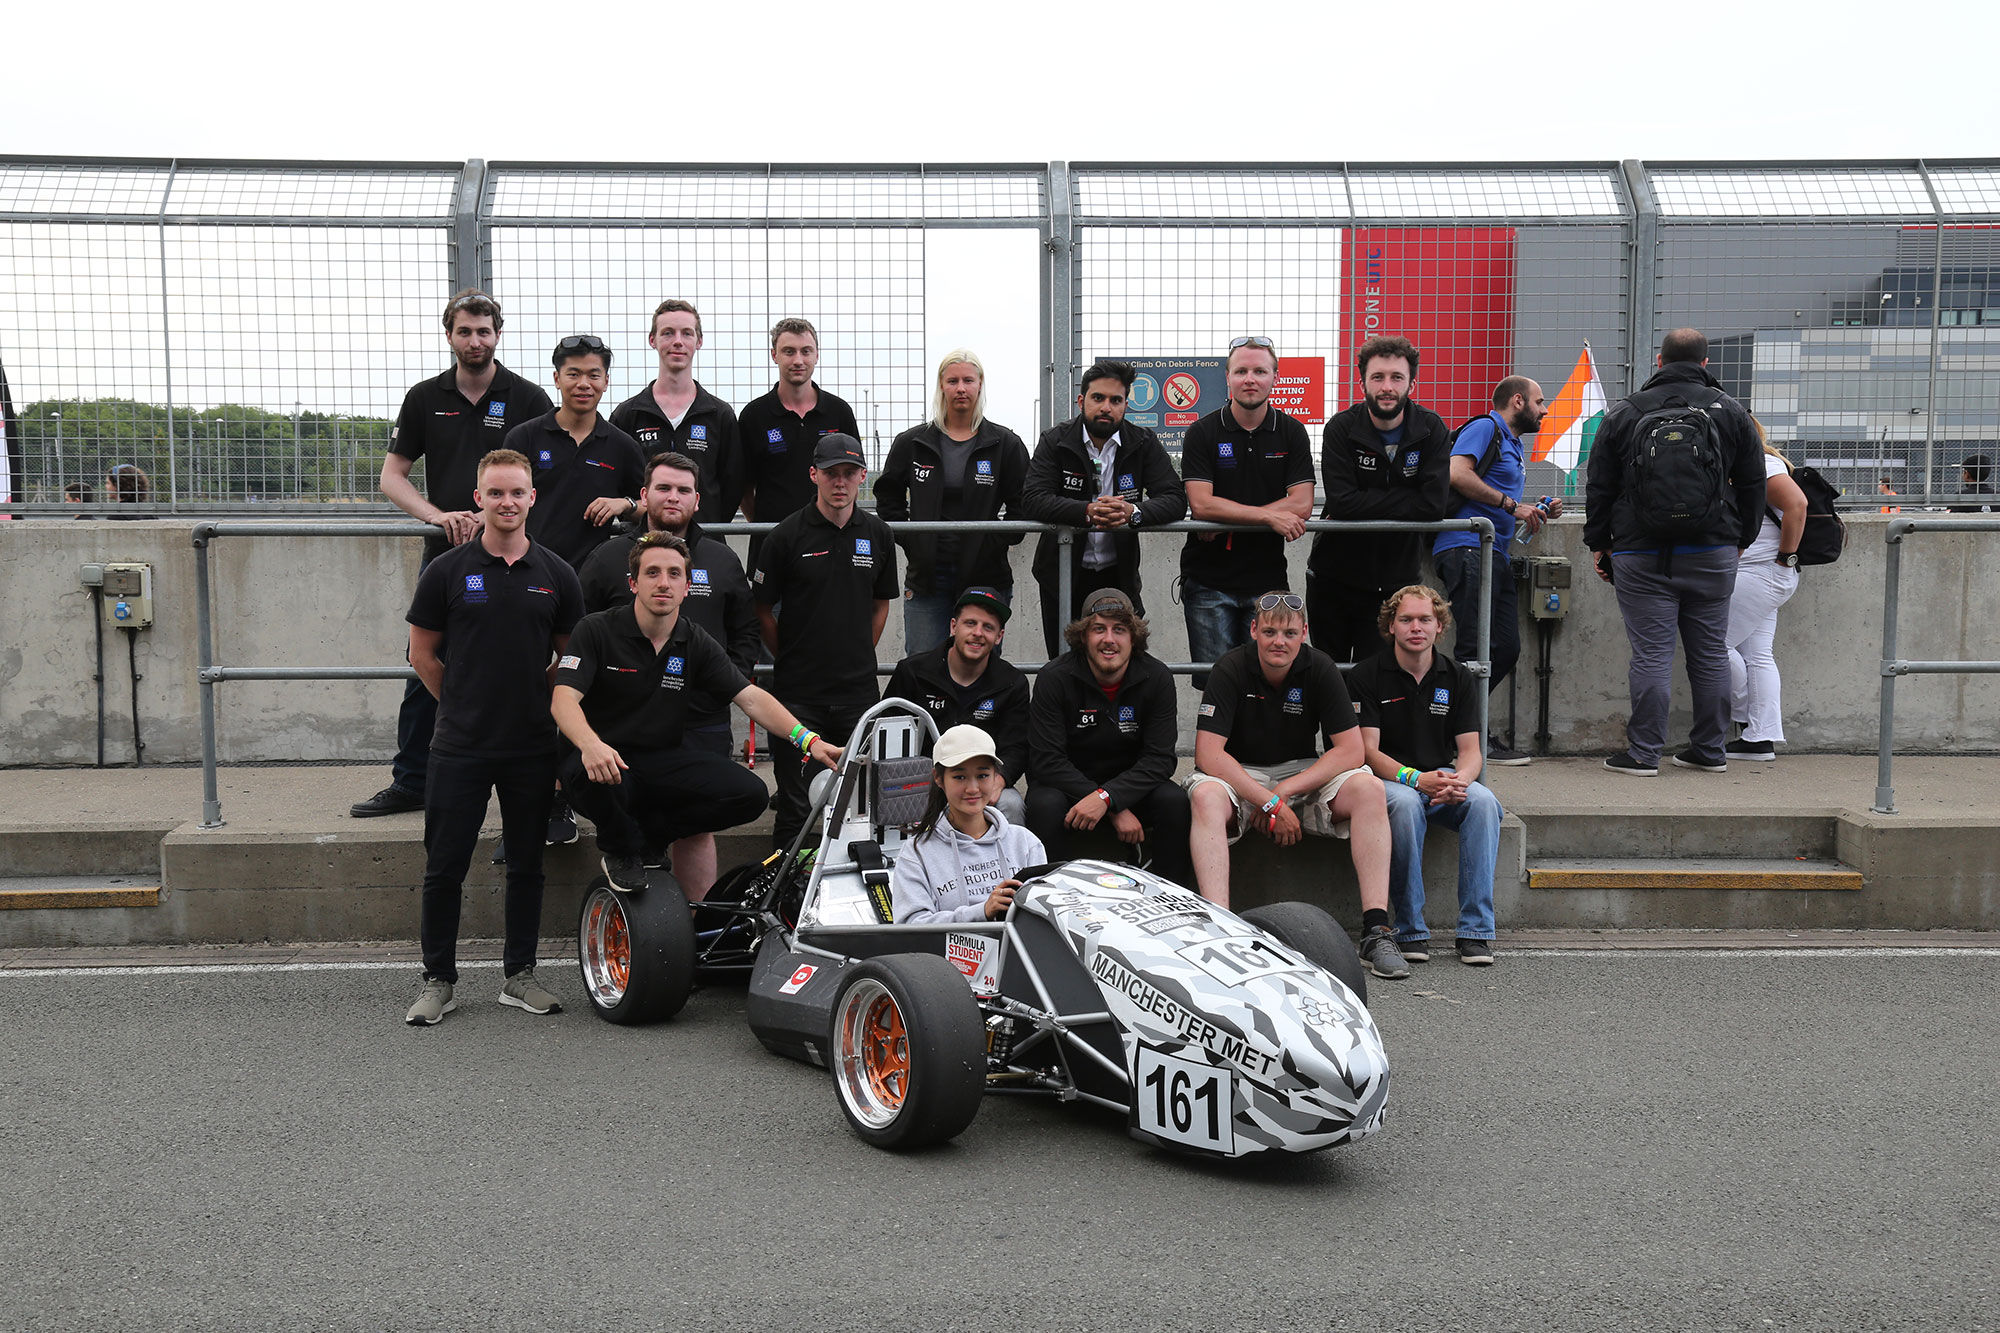 Race car engineers celebrate best result in Formula Student competition 